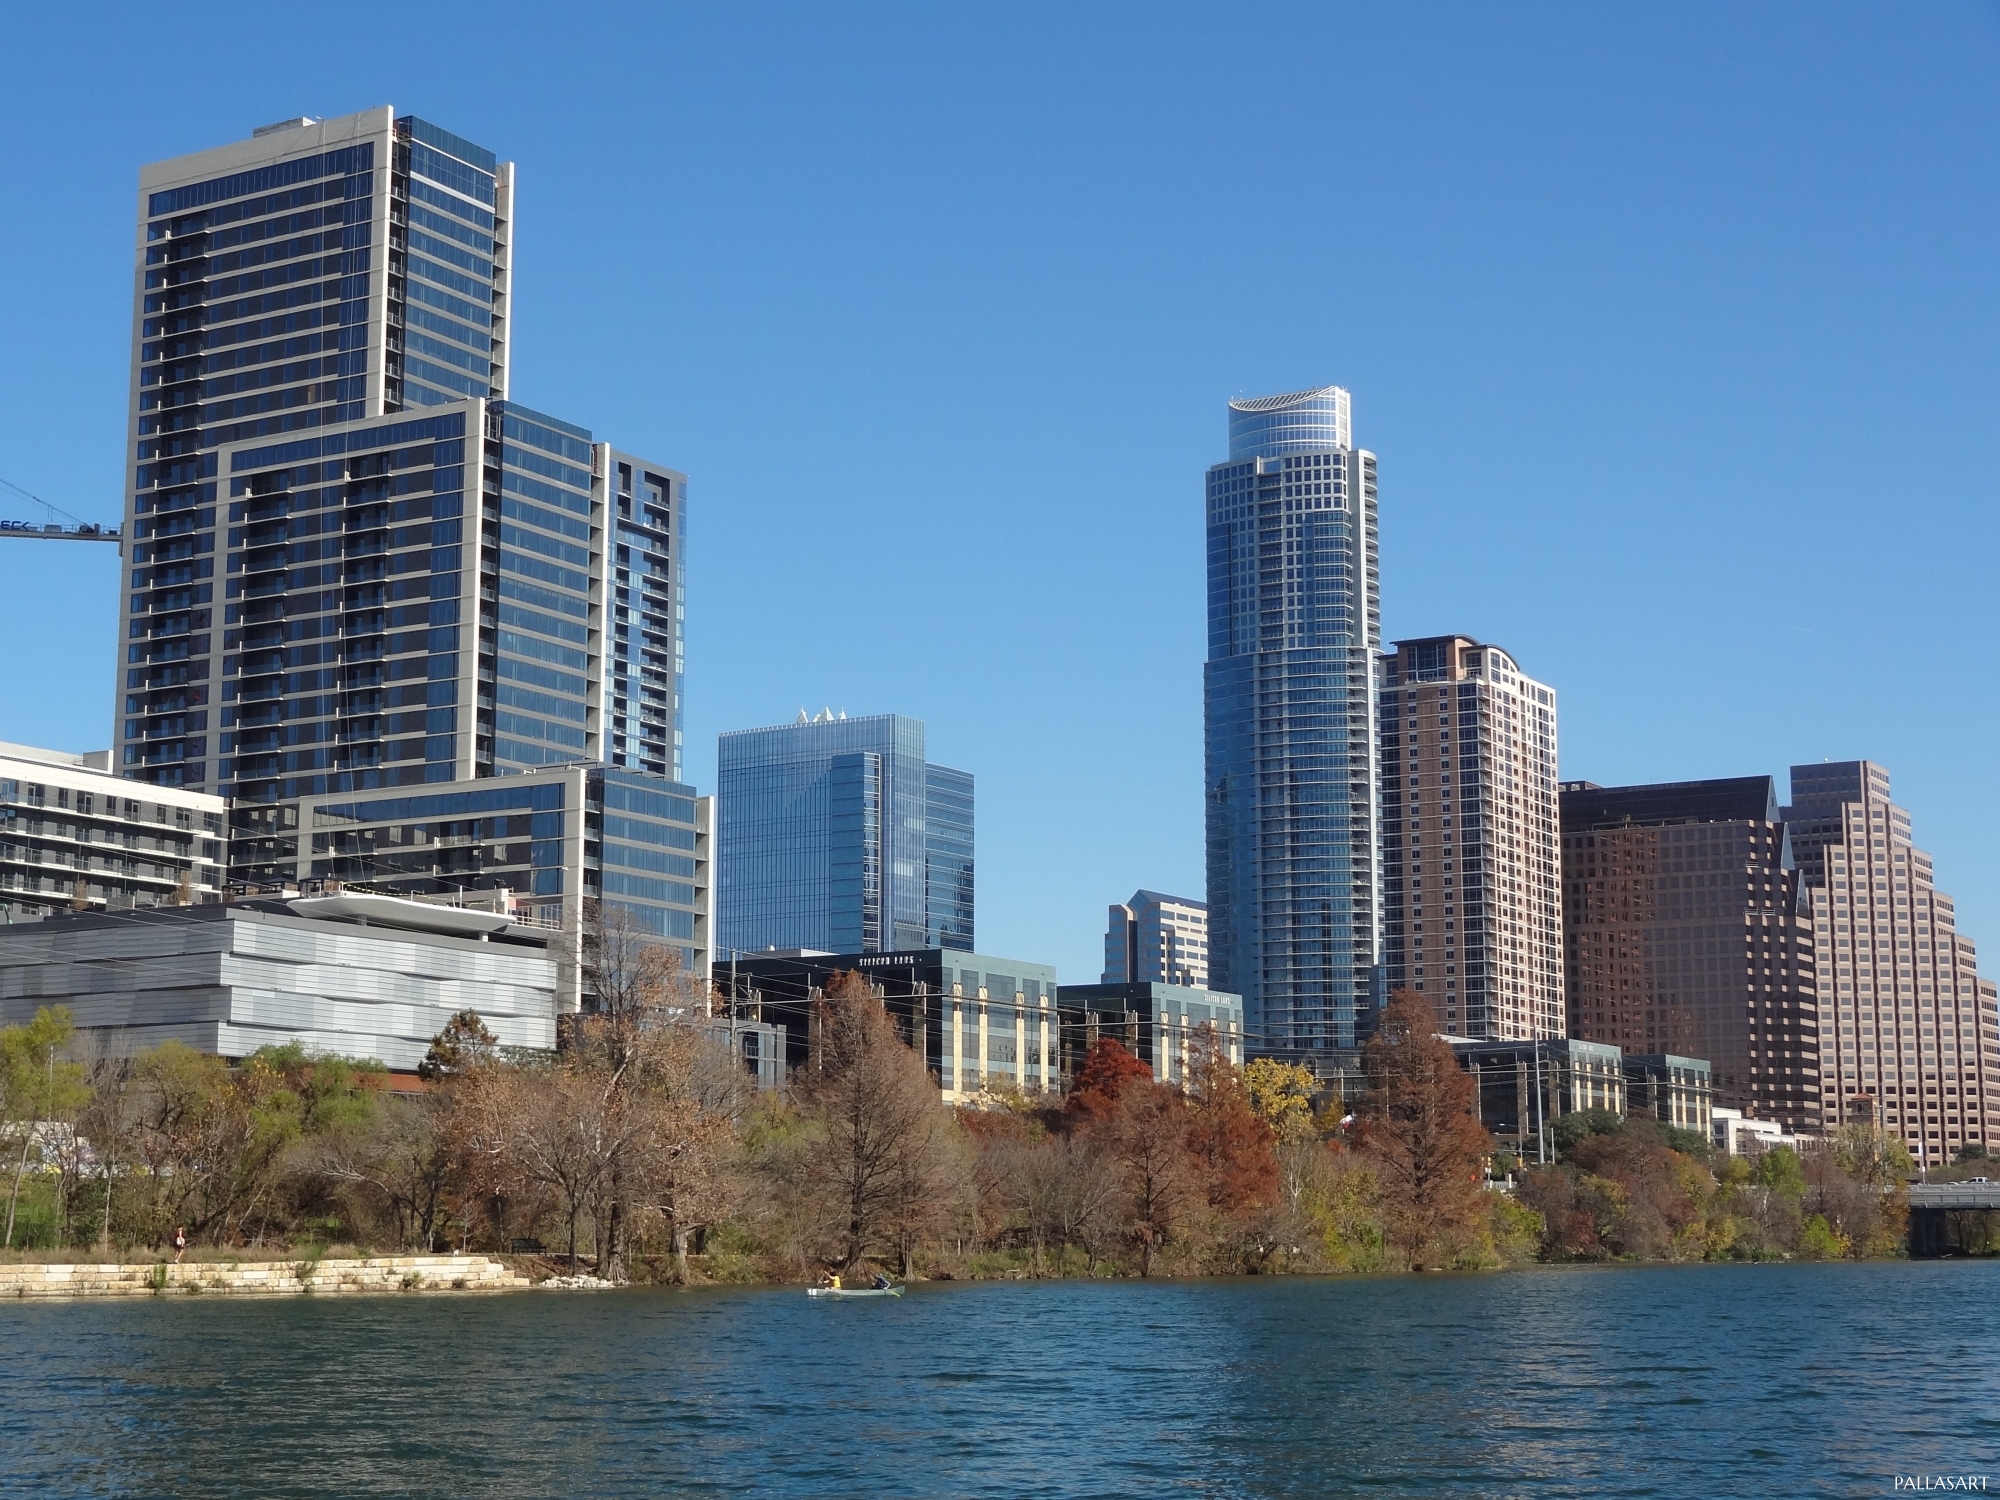 Buildings on North Shore of Austin's Lady Bird Lake